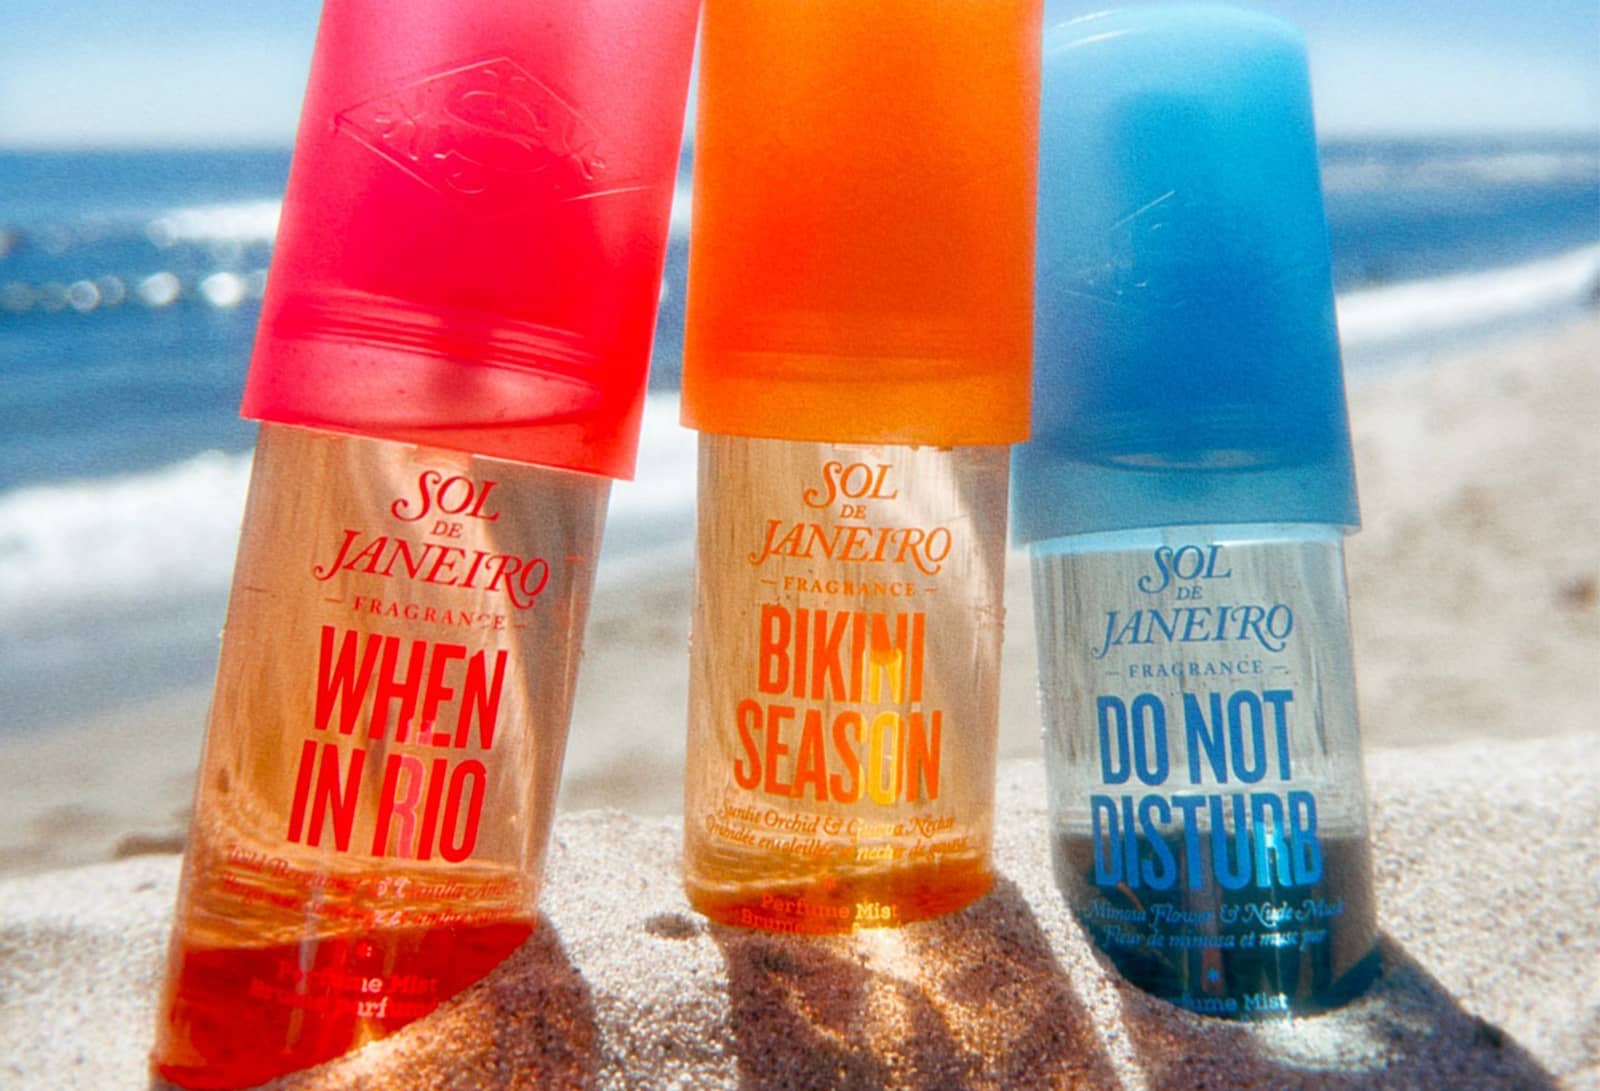 Sol De Janeiro's New Perfume Mist Is Like a Trip to the Beach in a Bottle